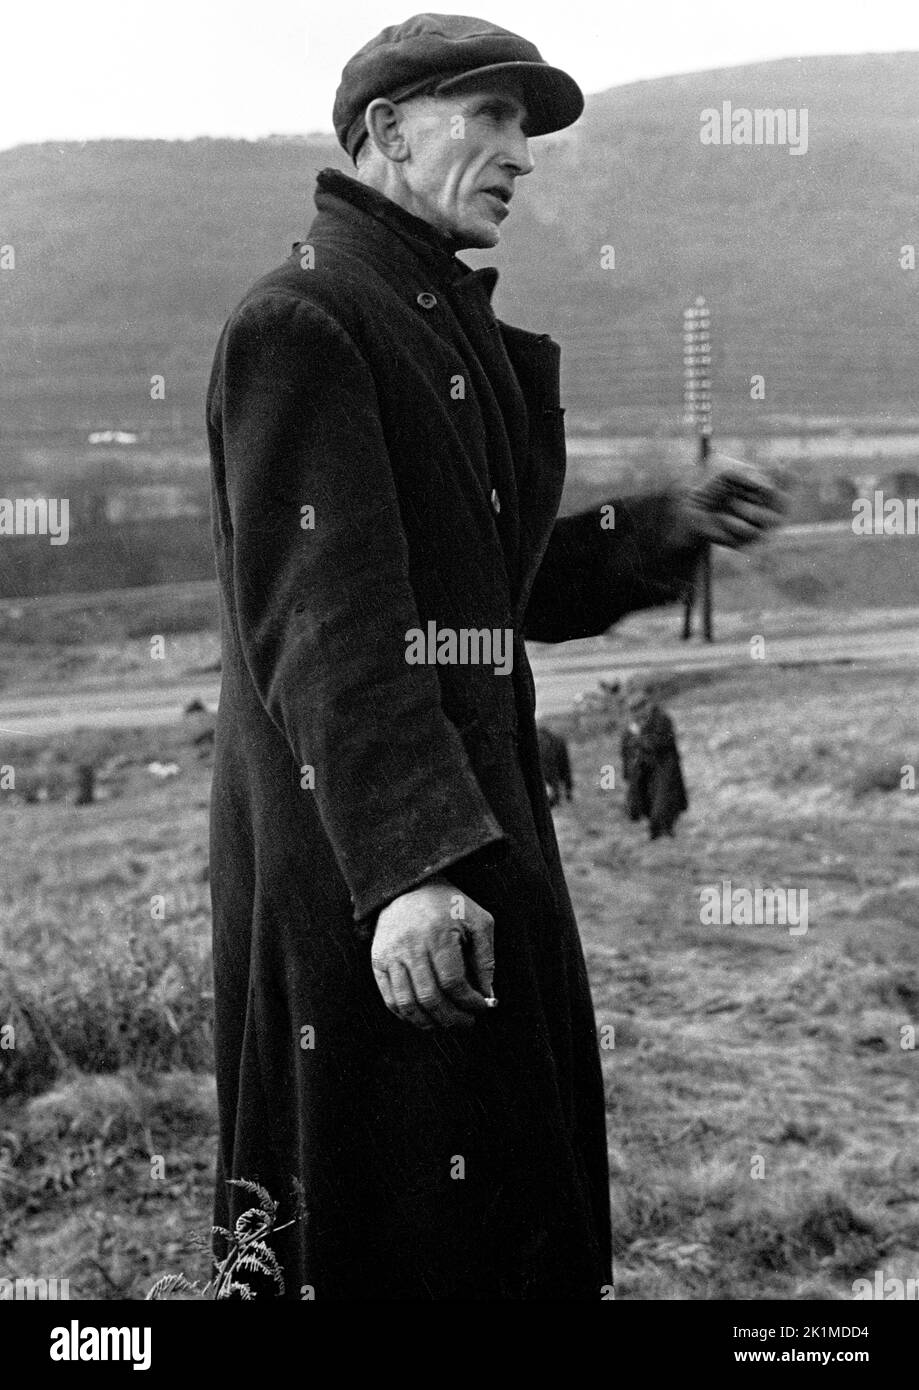 1940s, historical, a Welsh mine worker wearing ragged patched and ripped clothes standing on a sack of coal on rough ground at a slag heap, Merthyr, South Wales, UK. Stock Photo